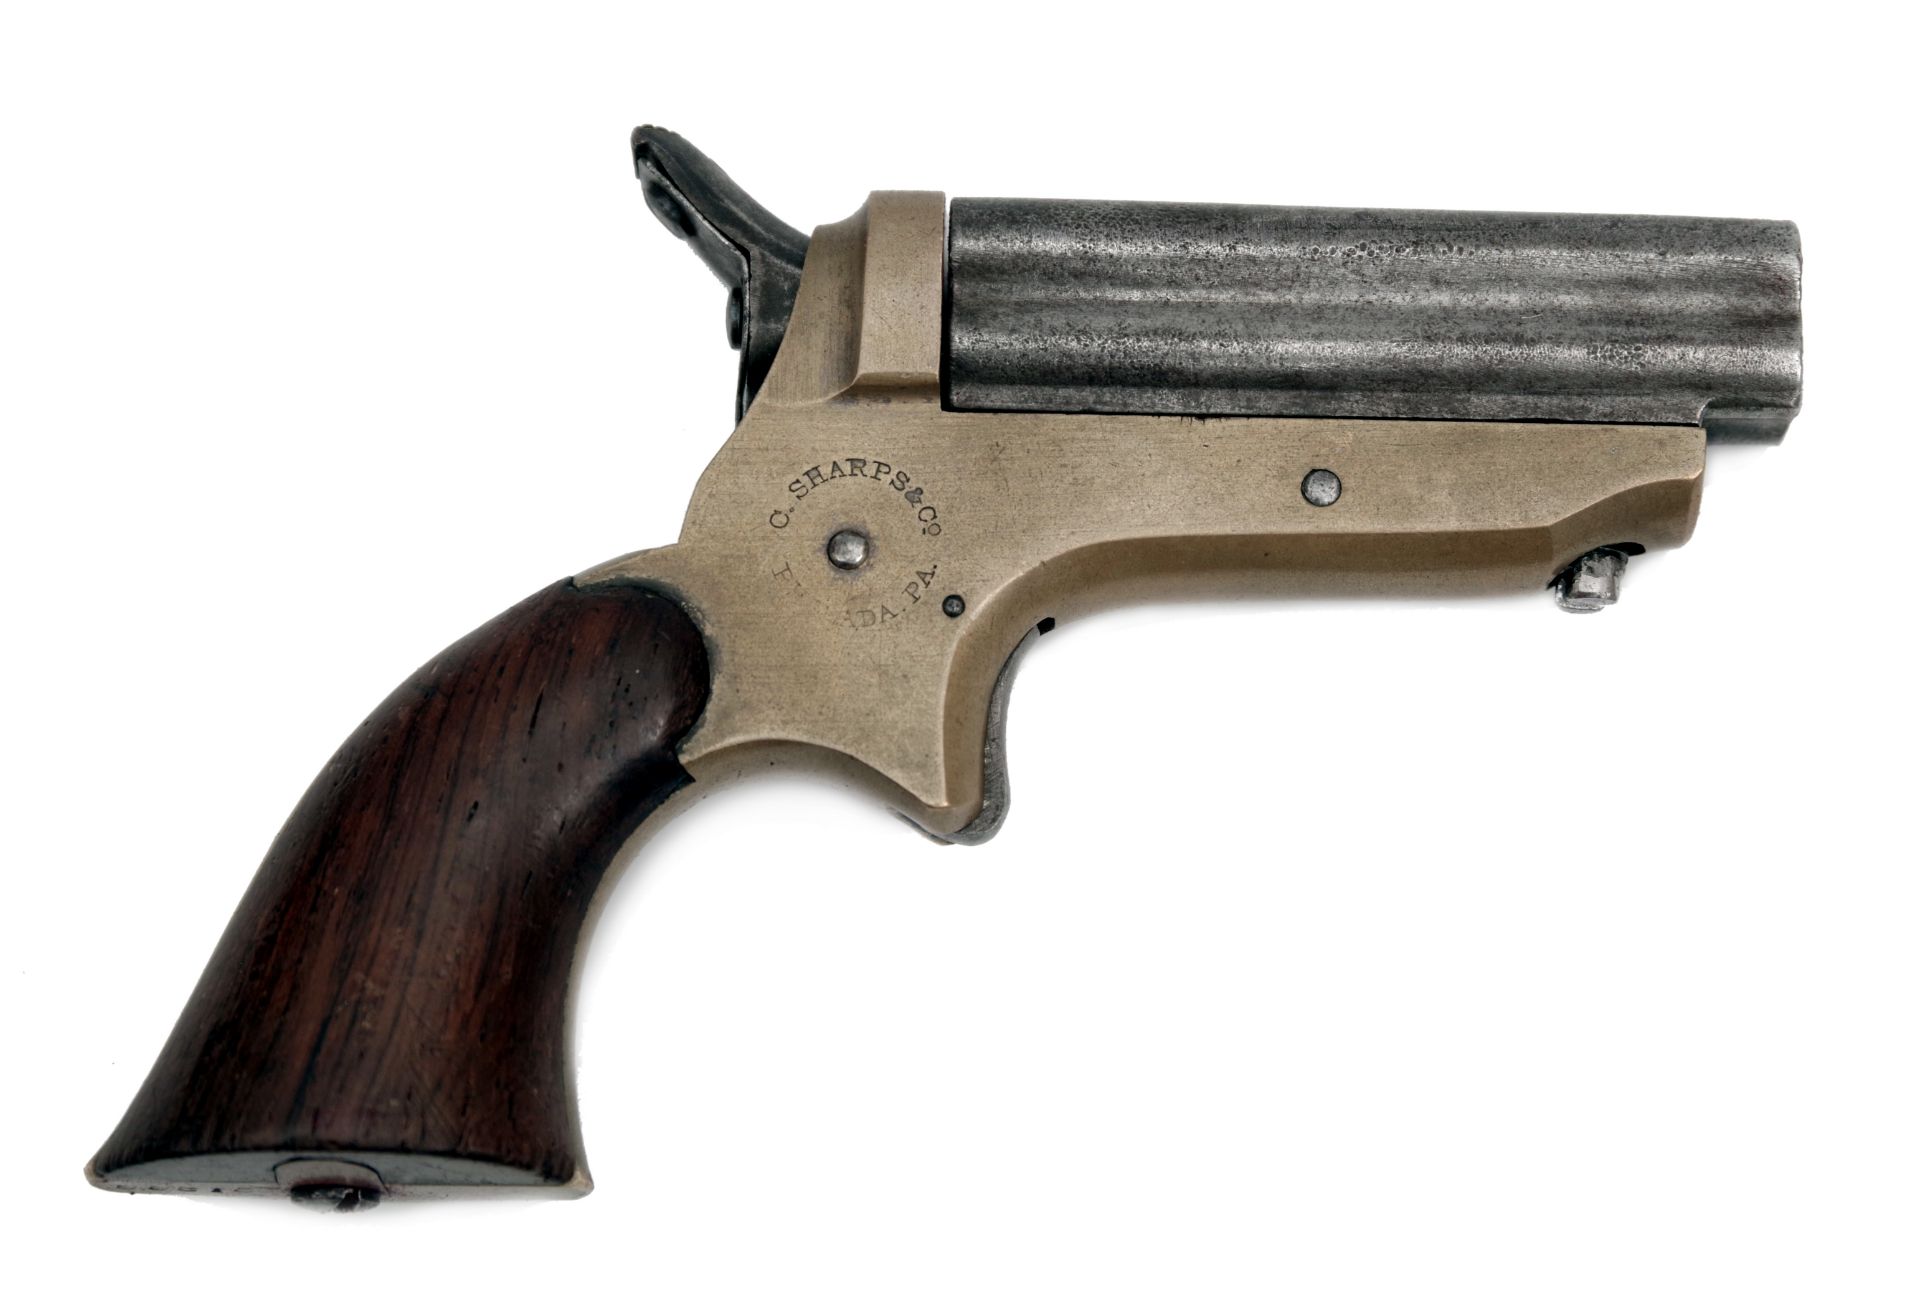 A Cased Sharps Four Barrel Pepperbox Pistol with Exchangeable Barrel - Image 7 of 8